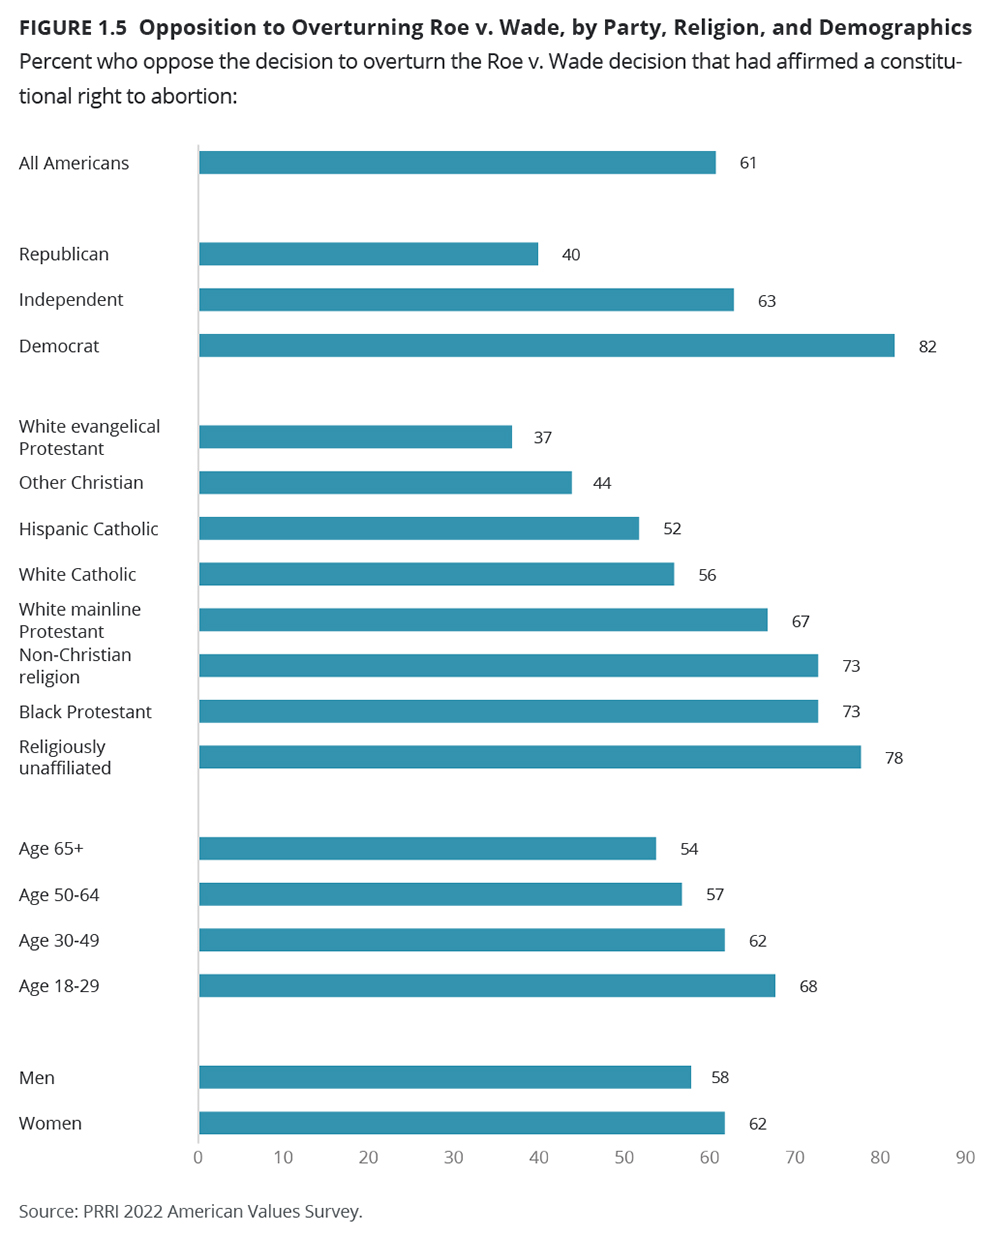 "Opposition to Overturning Roe v. Wade, by Party, Religion, and Demographics" Graphic courtesy of PRRI